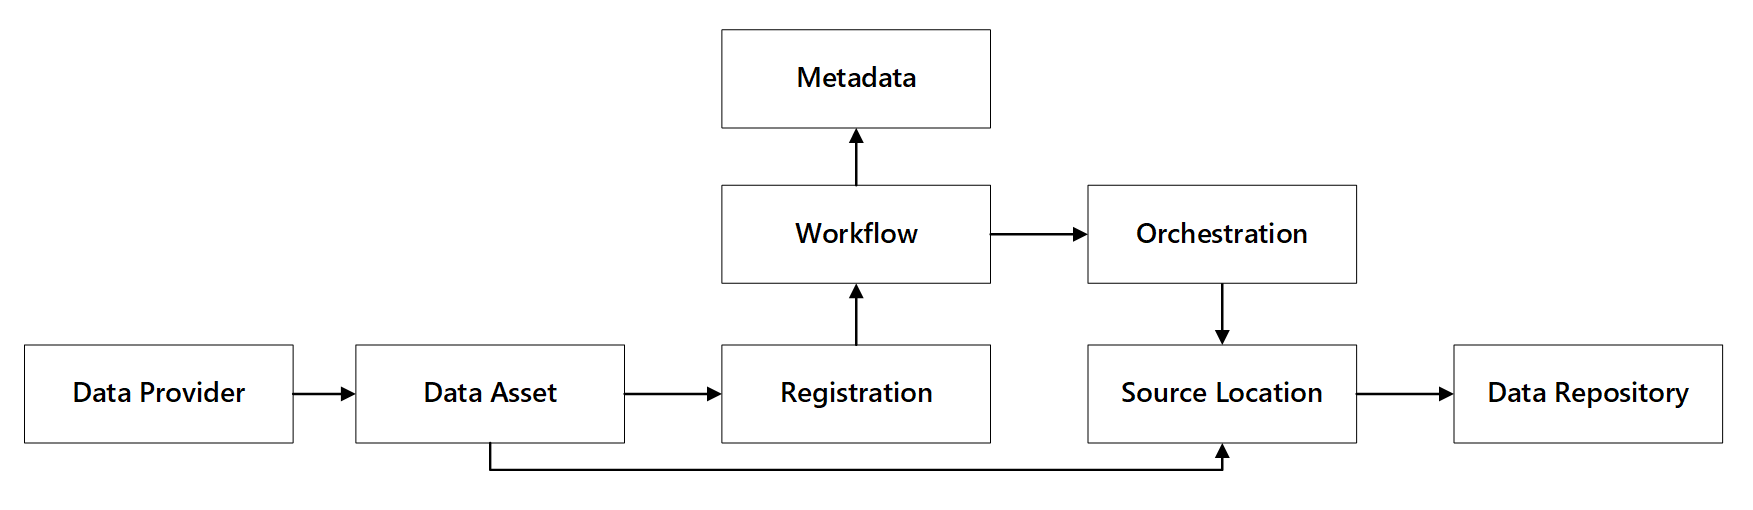 Diagram of data registration capabilities and interactions